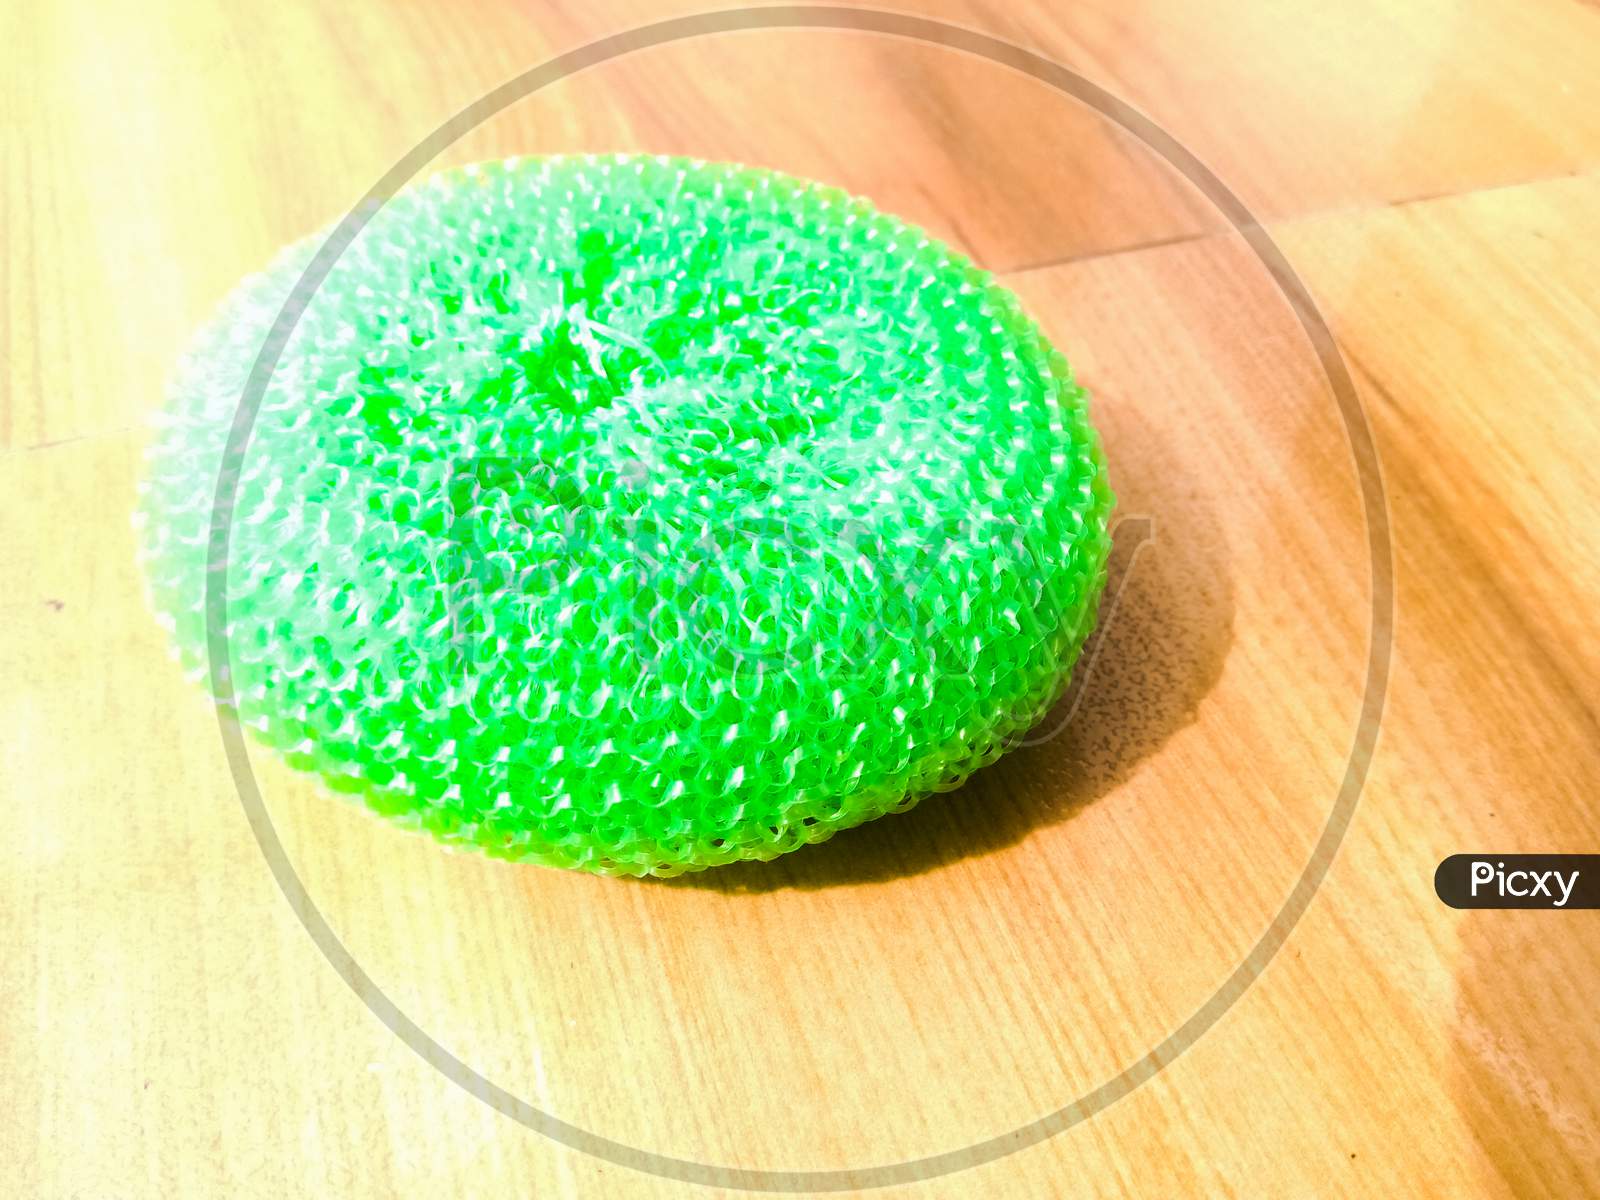 A Green Plastic Scrubber Placed On Floor.